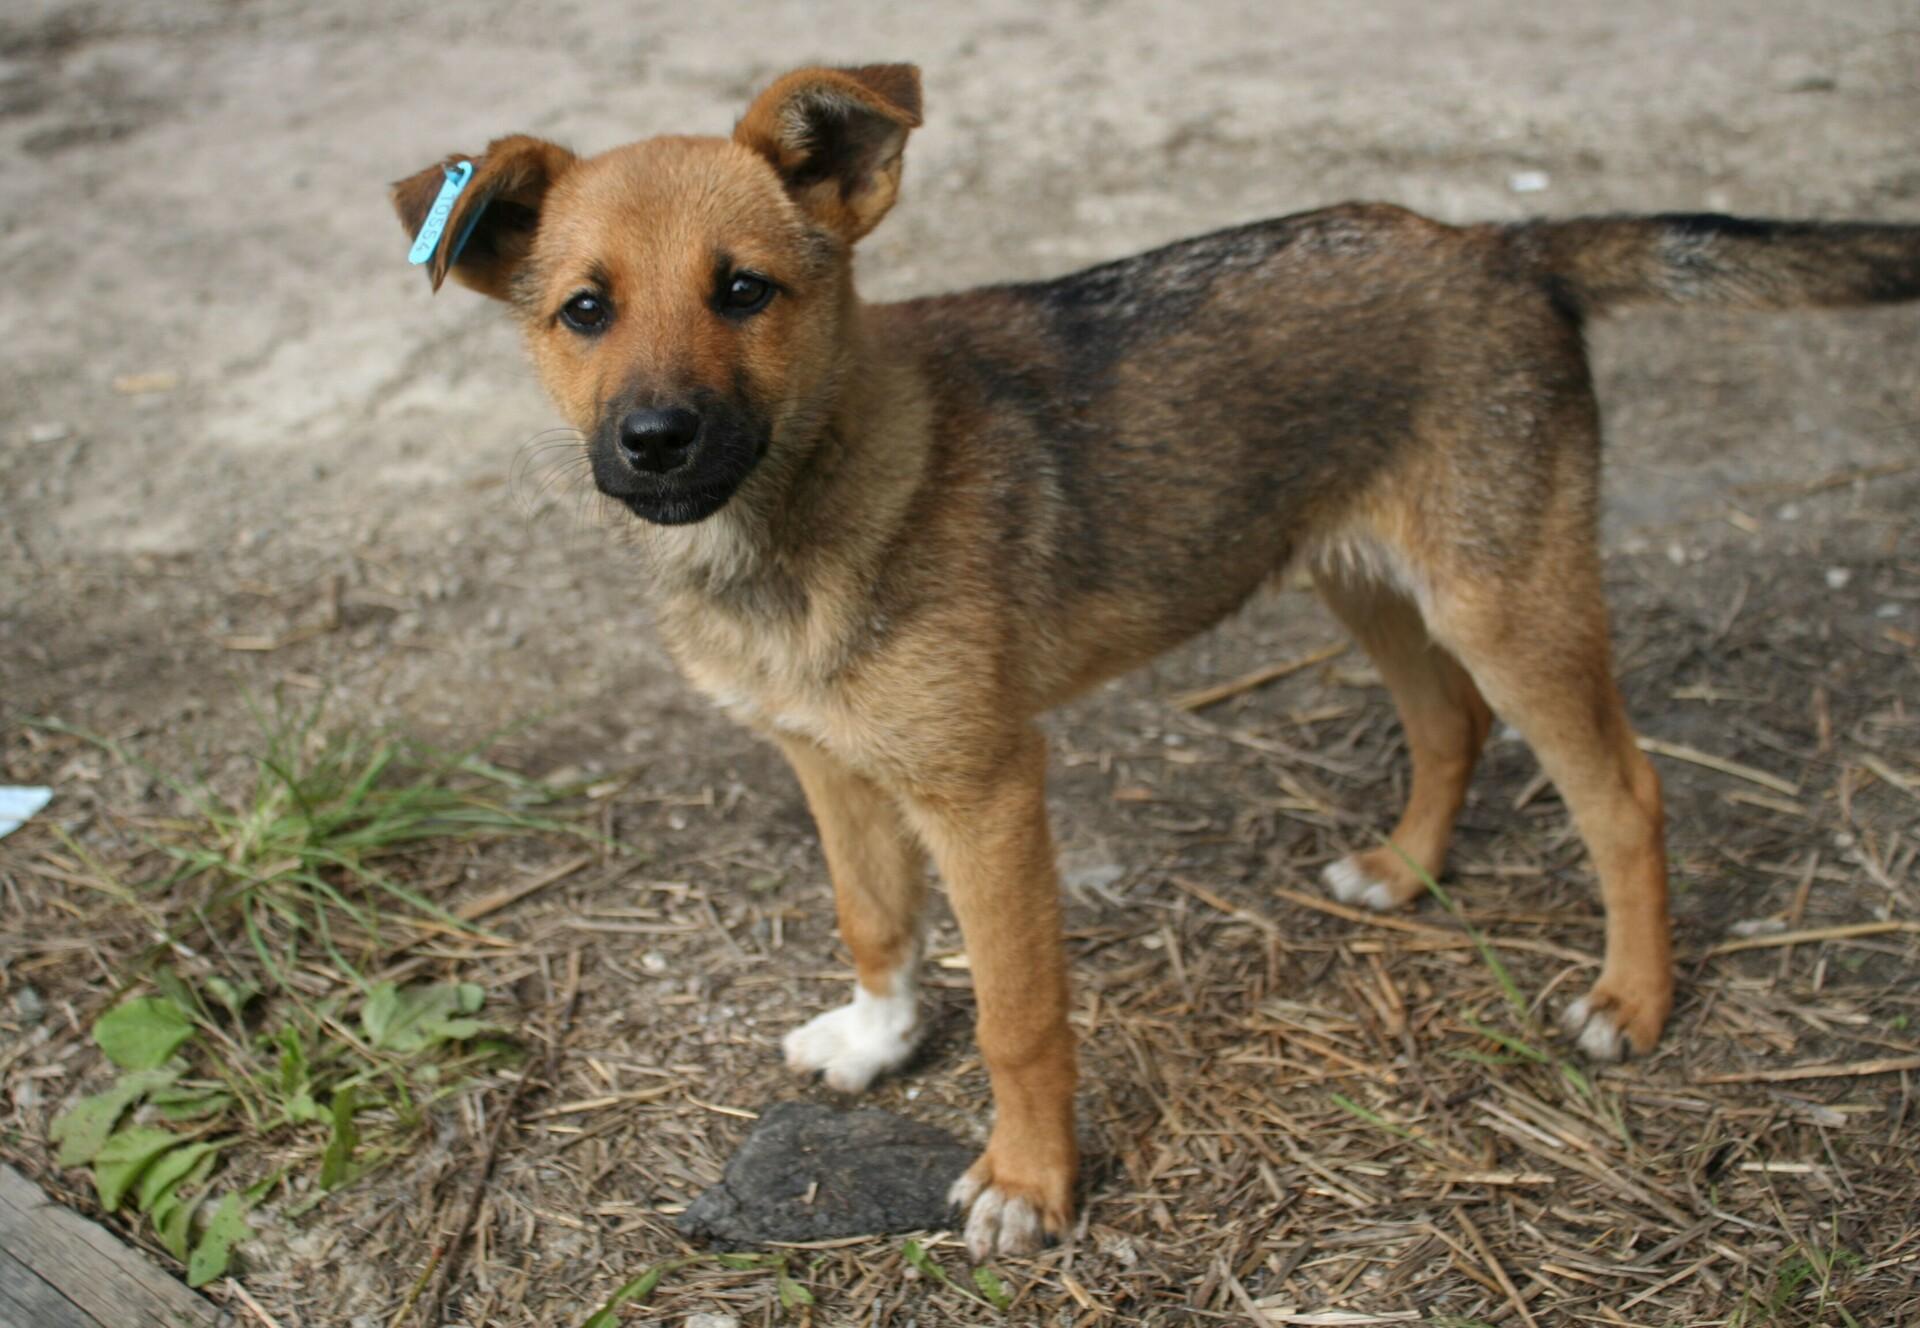 Stray Animal Care In Ukraine Help For Stray Animals Topics Campaigns Topics Four Paws International